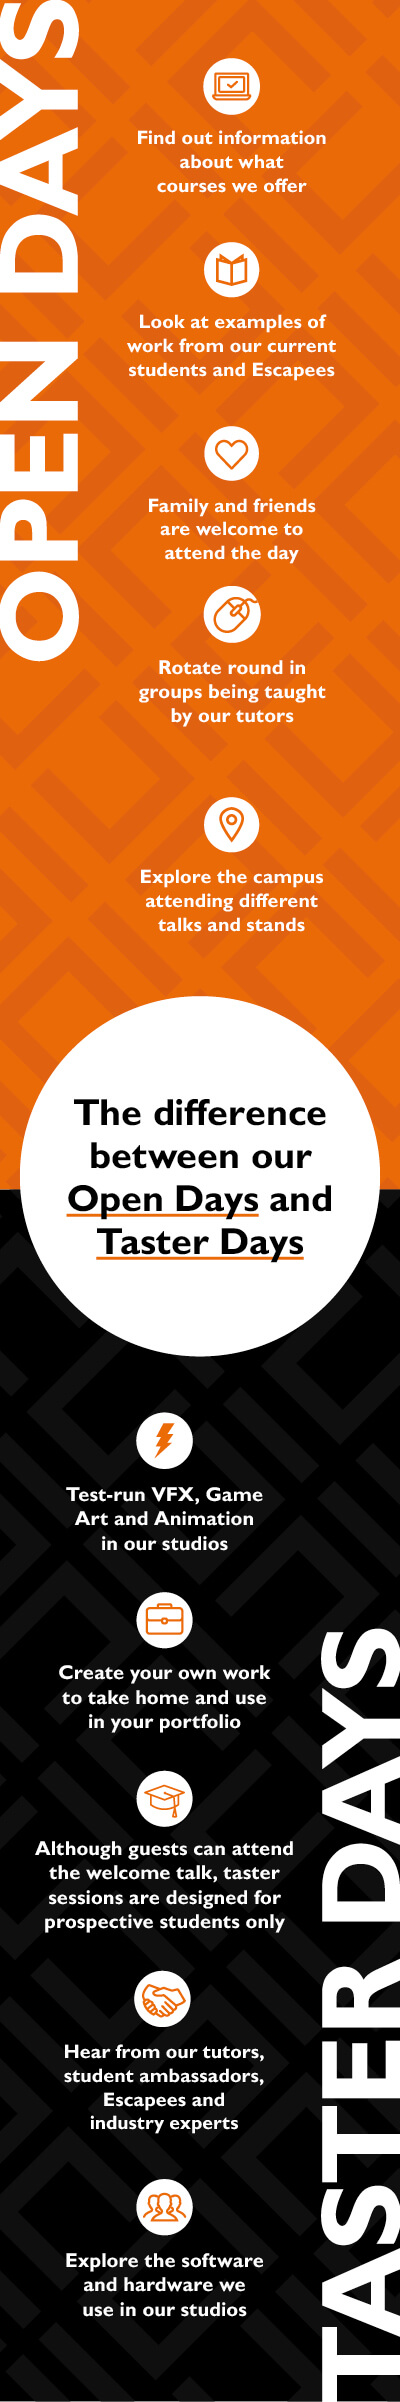 An infographic showing the differences between open days and taster days